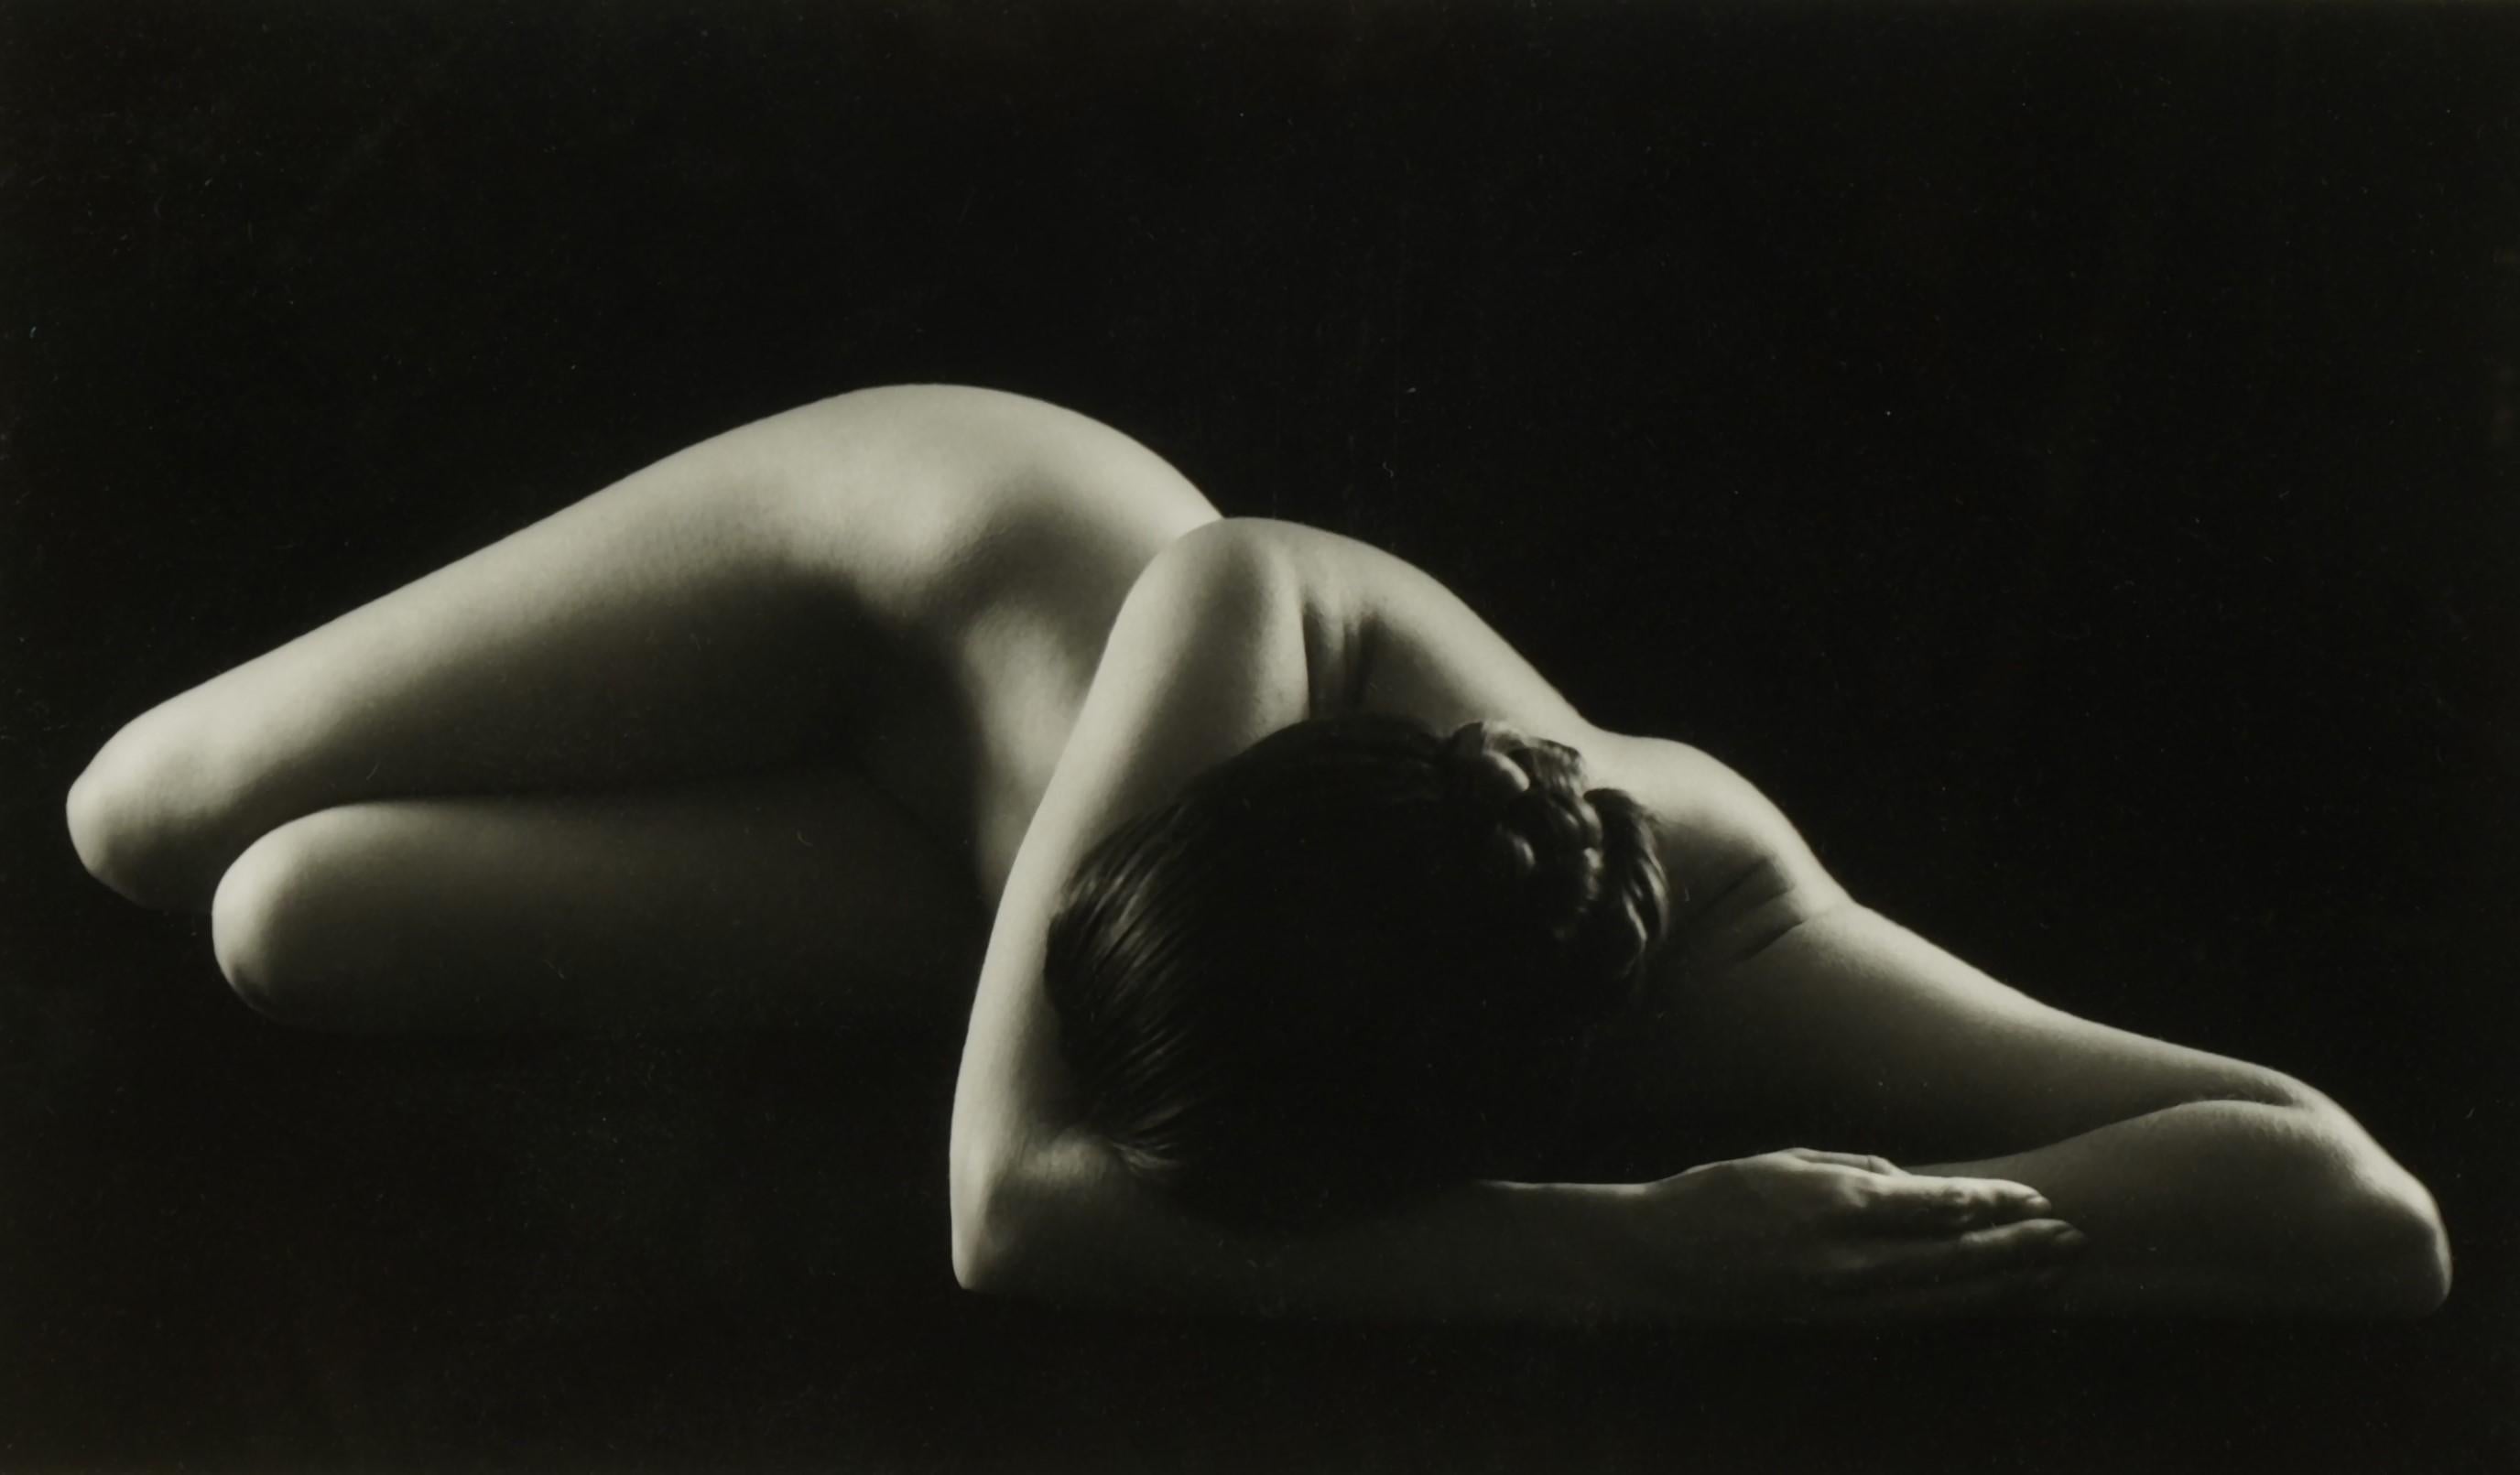 Mid-Century Modern Ruth Bernhard Signed Gelatin Silver Photograph Print Perspective II, 1967 For Sale